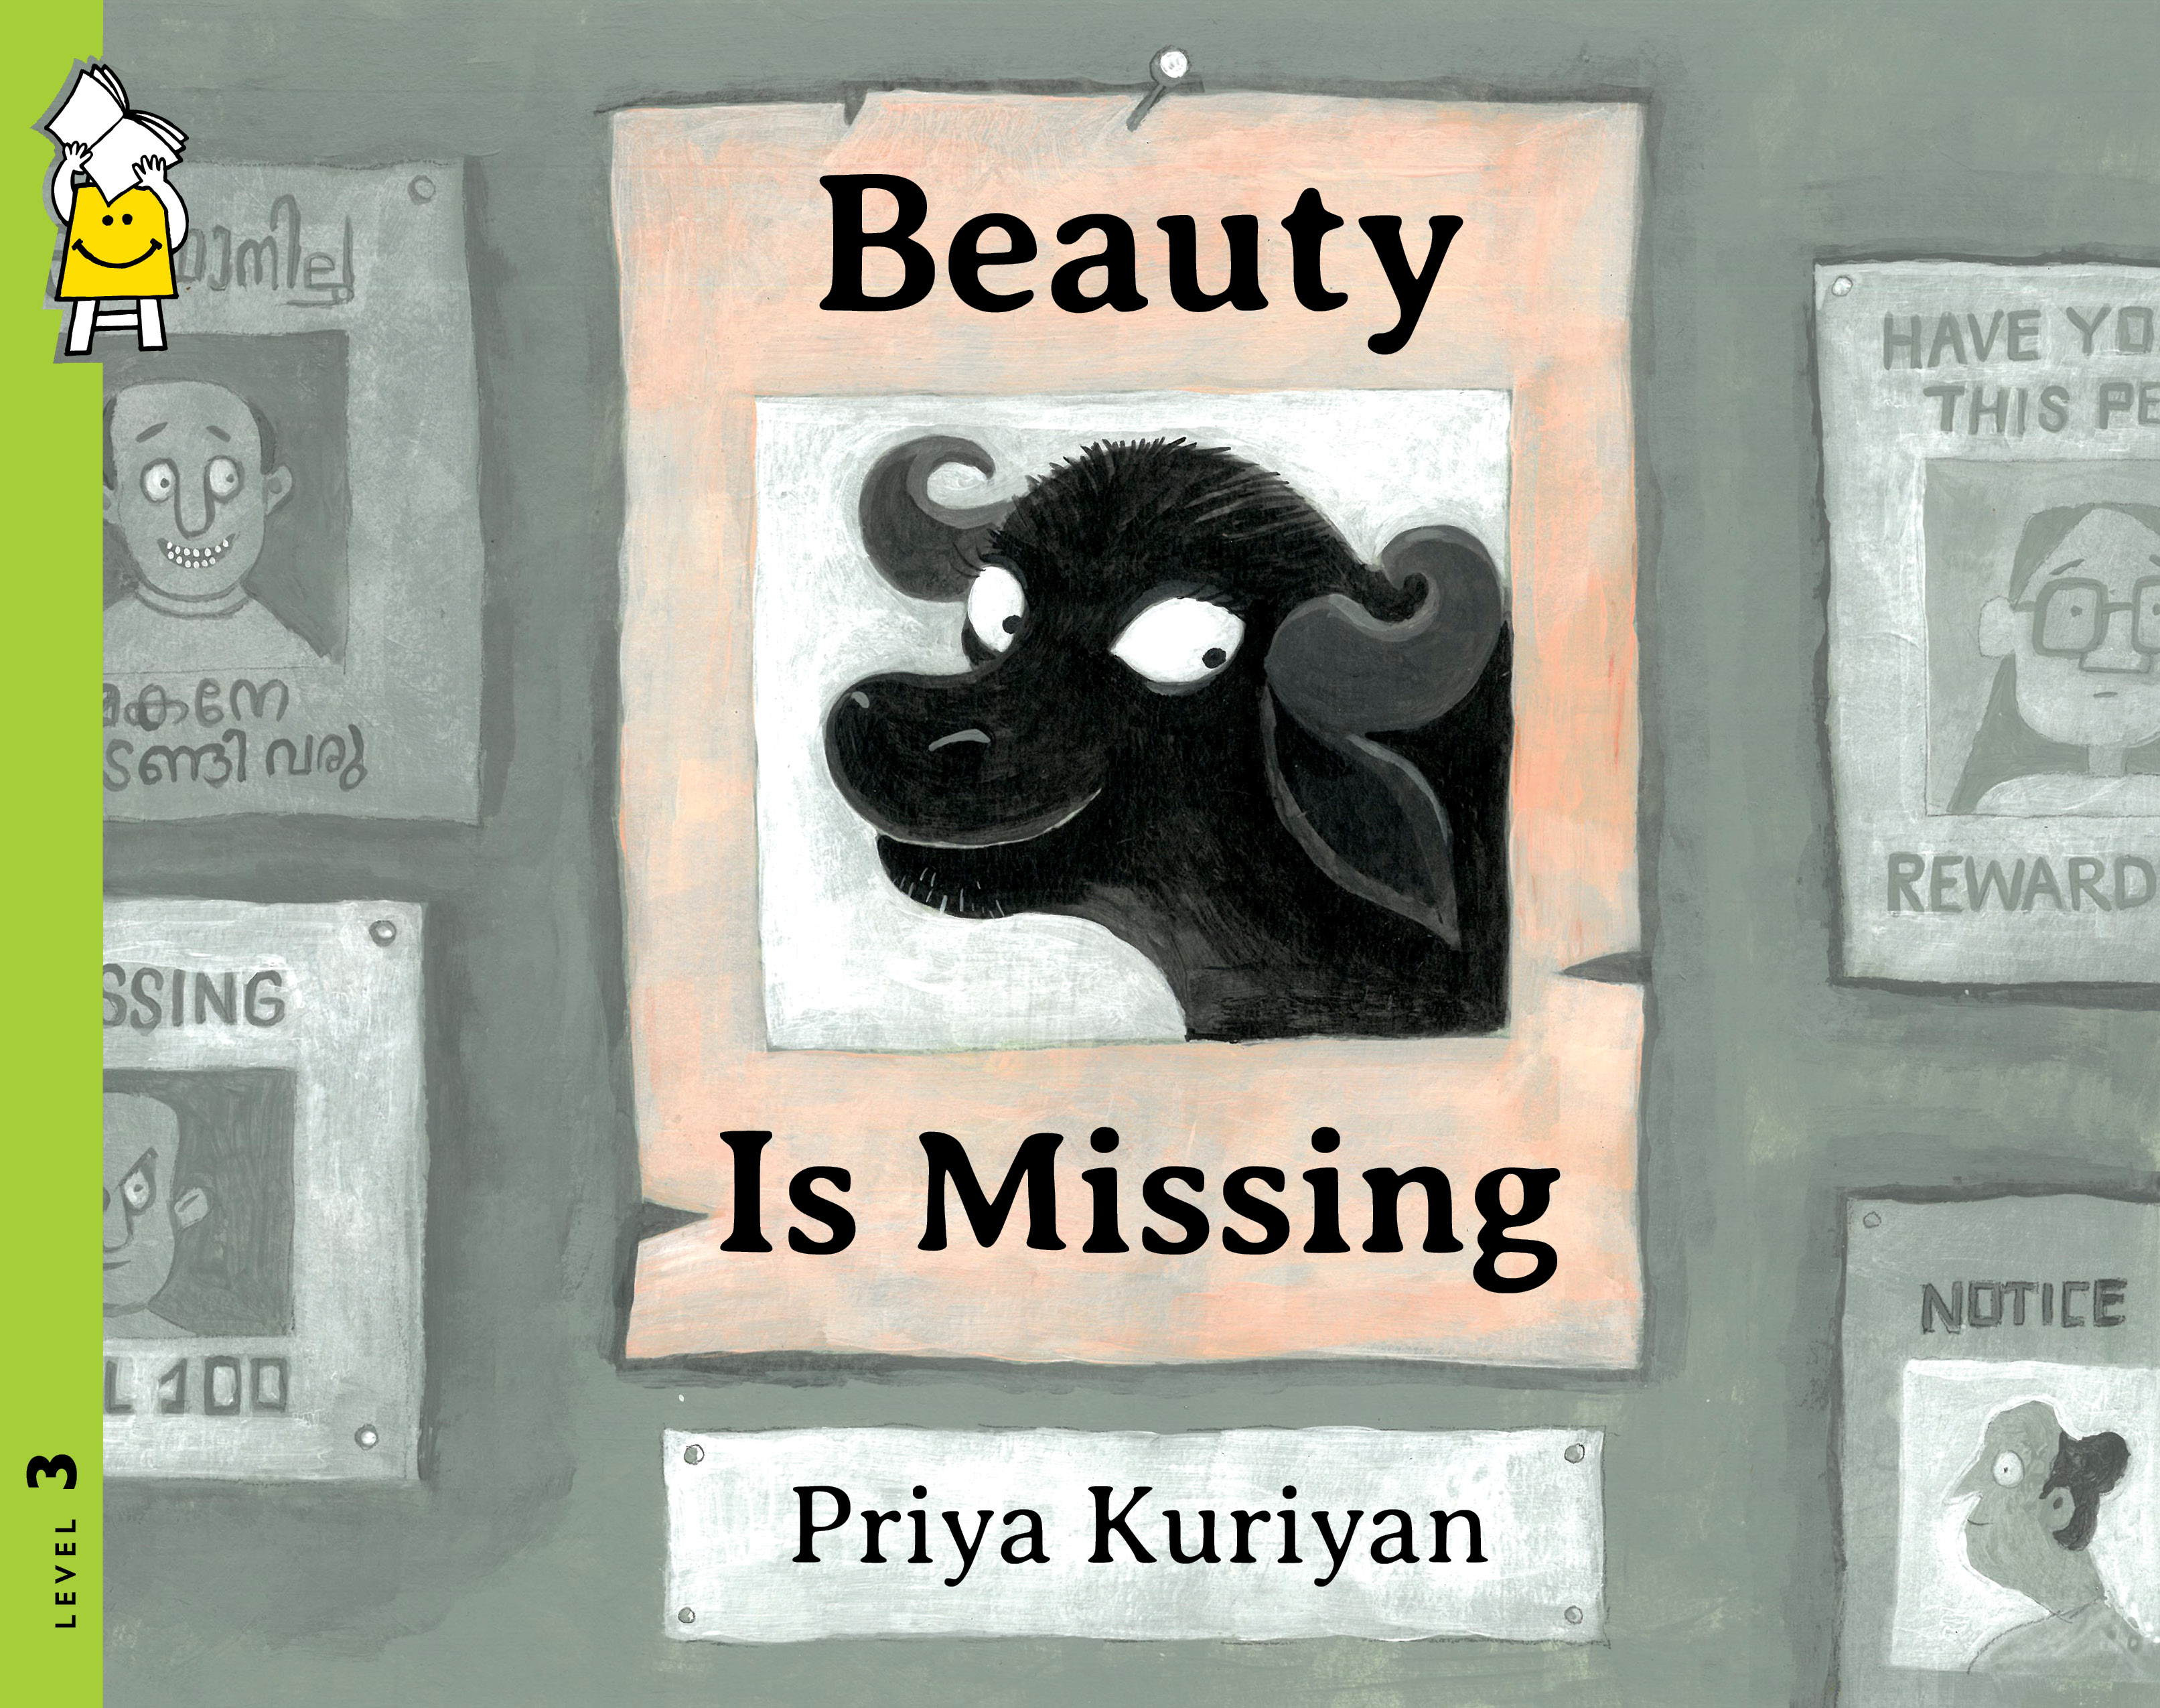 IMG : Beauty is Missing